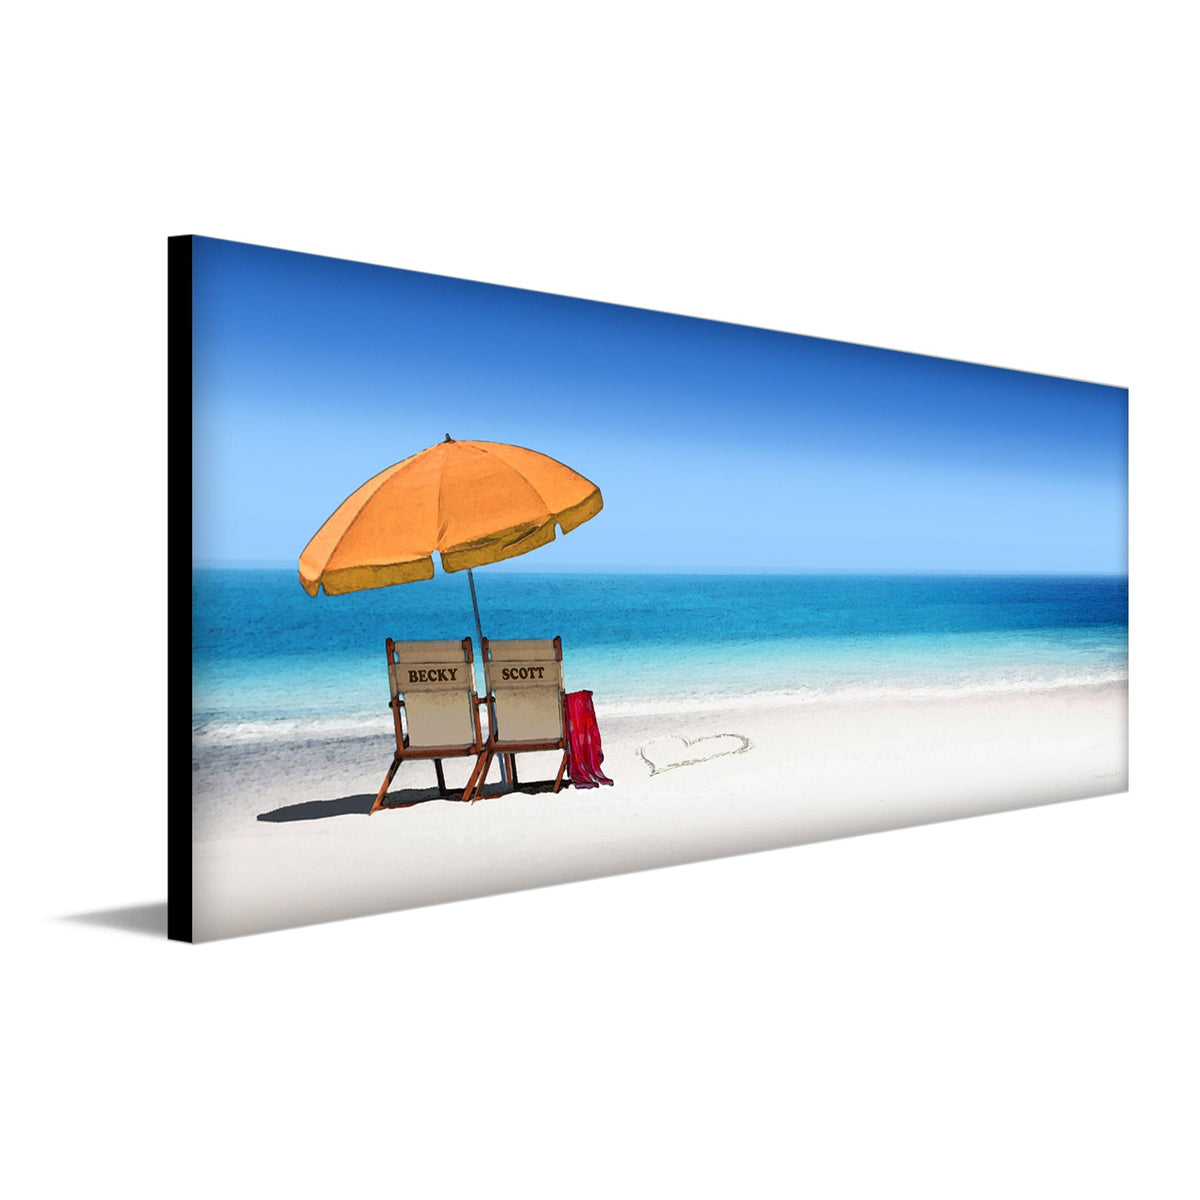 Colorful personalized relaxing blue tones beach decor with umbrella and your names on beach chairs.  - Personal-Prints